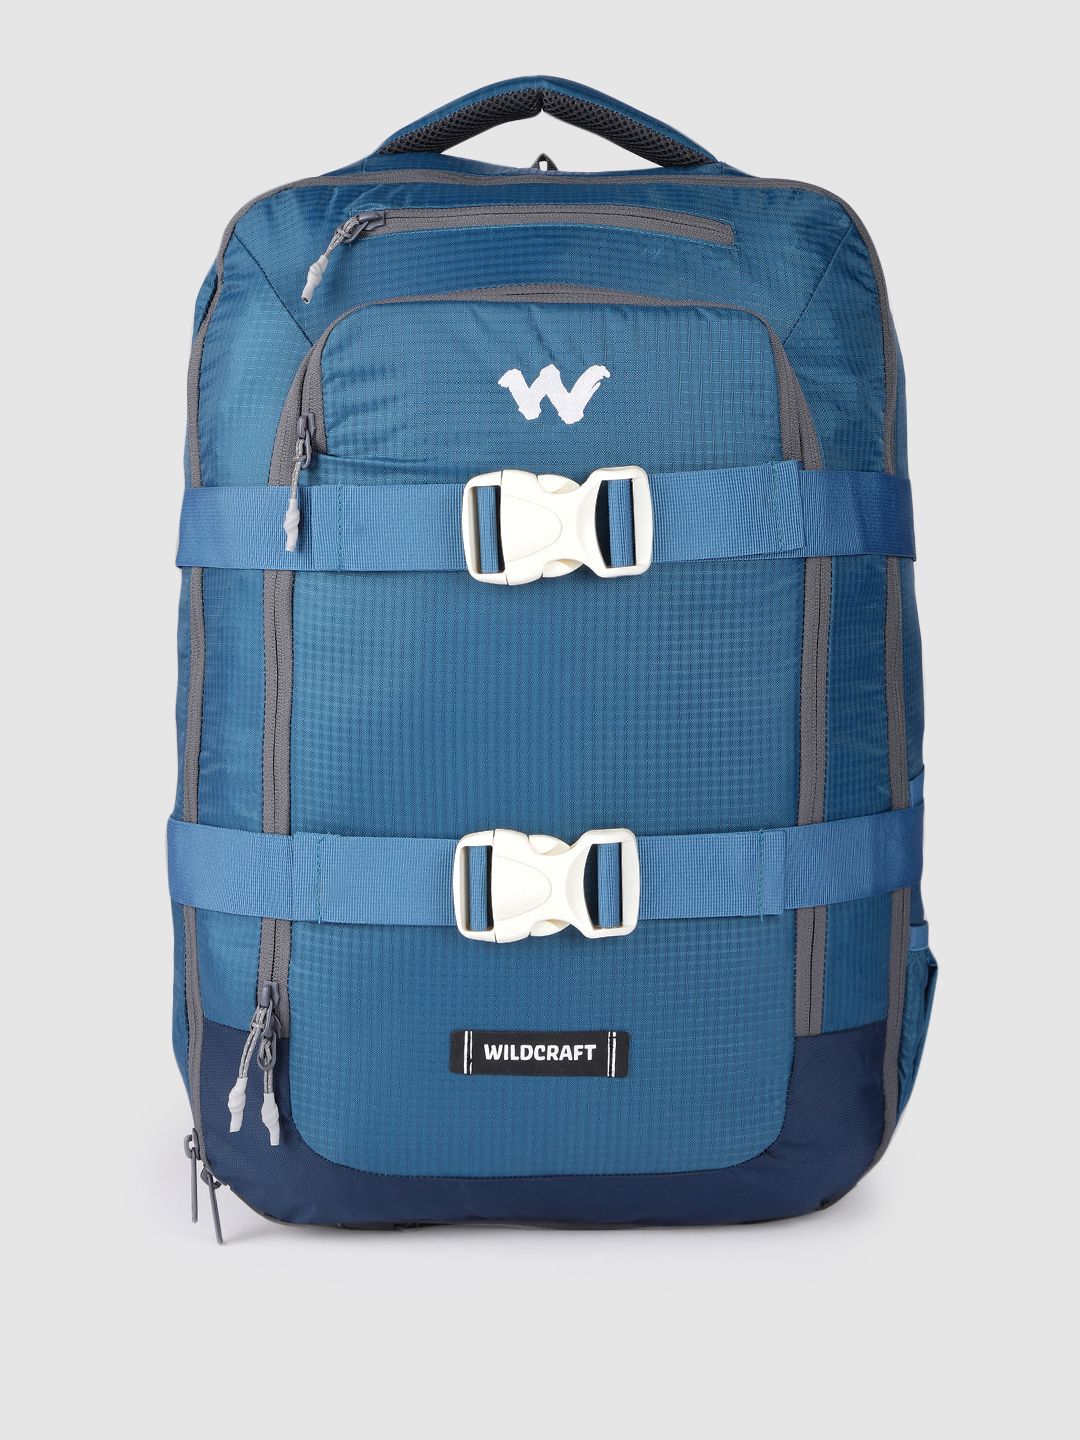 Wildcraft Unisex Blue Backpack with Compression Straps Price in India